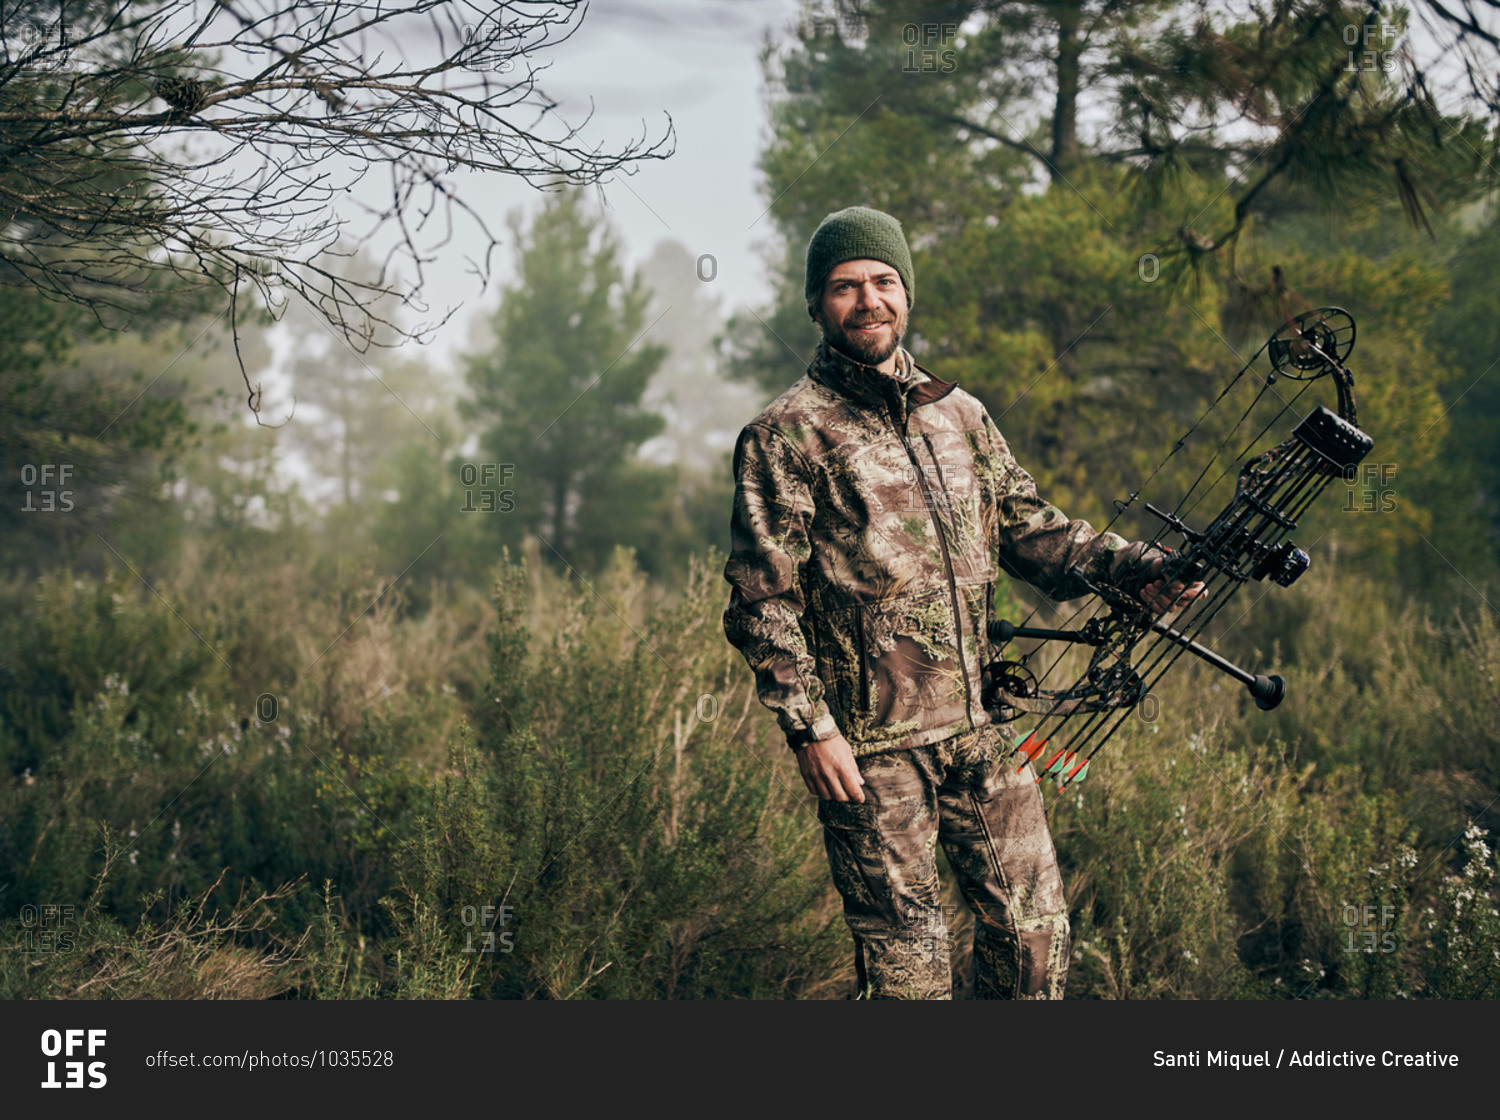 Cheerful man in camouflage standing with compound bow in forest and looking at camera during hunting